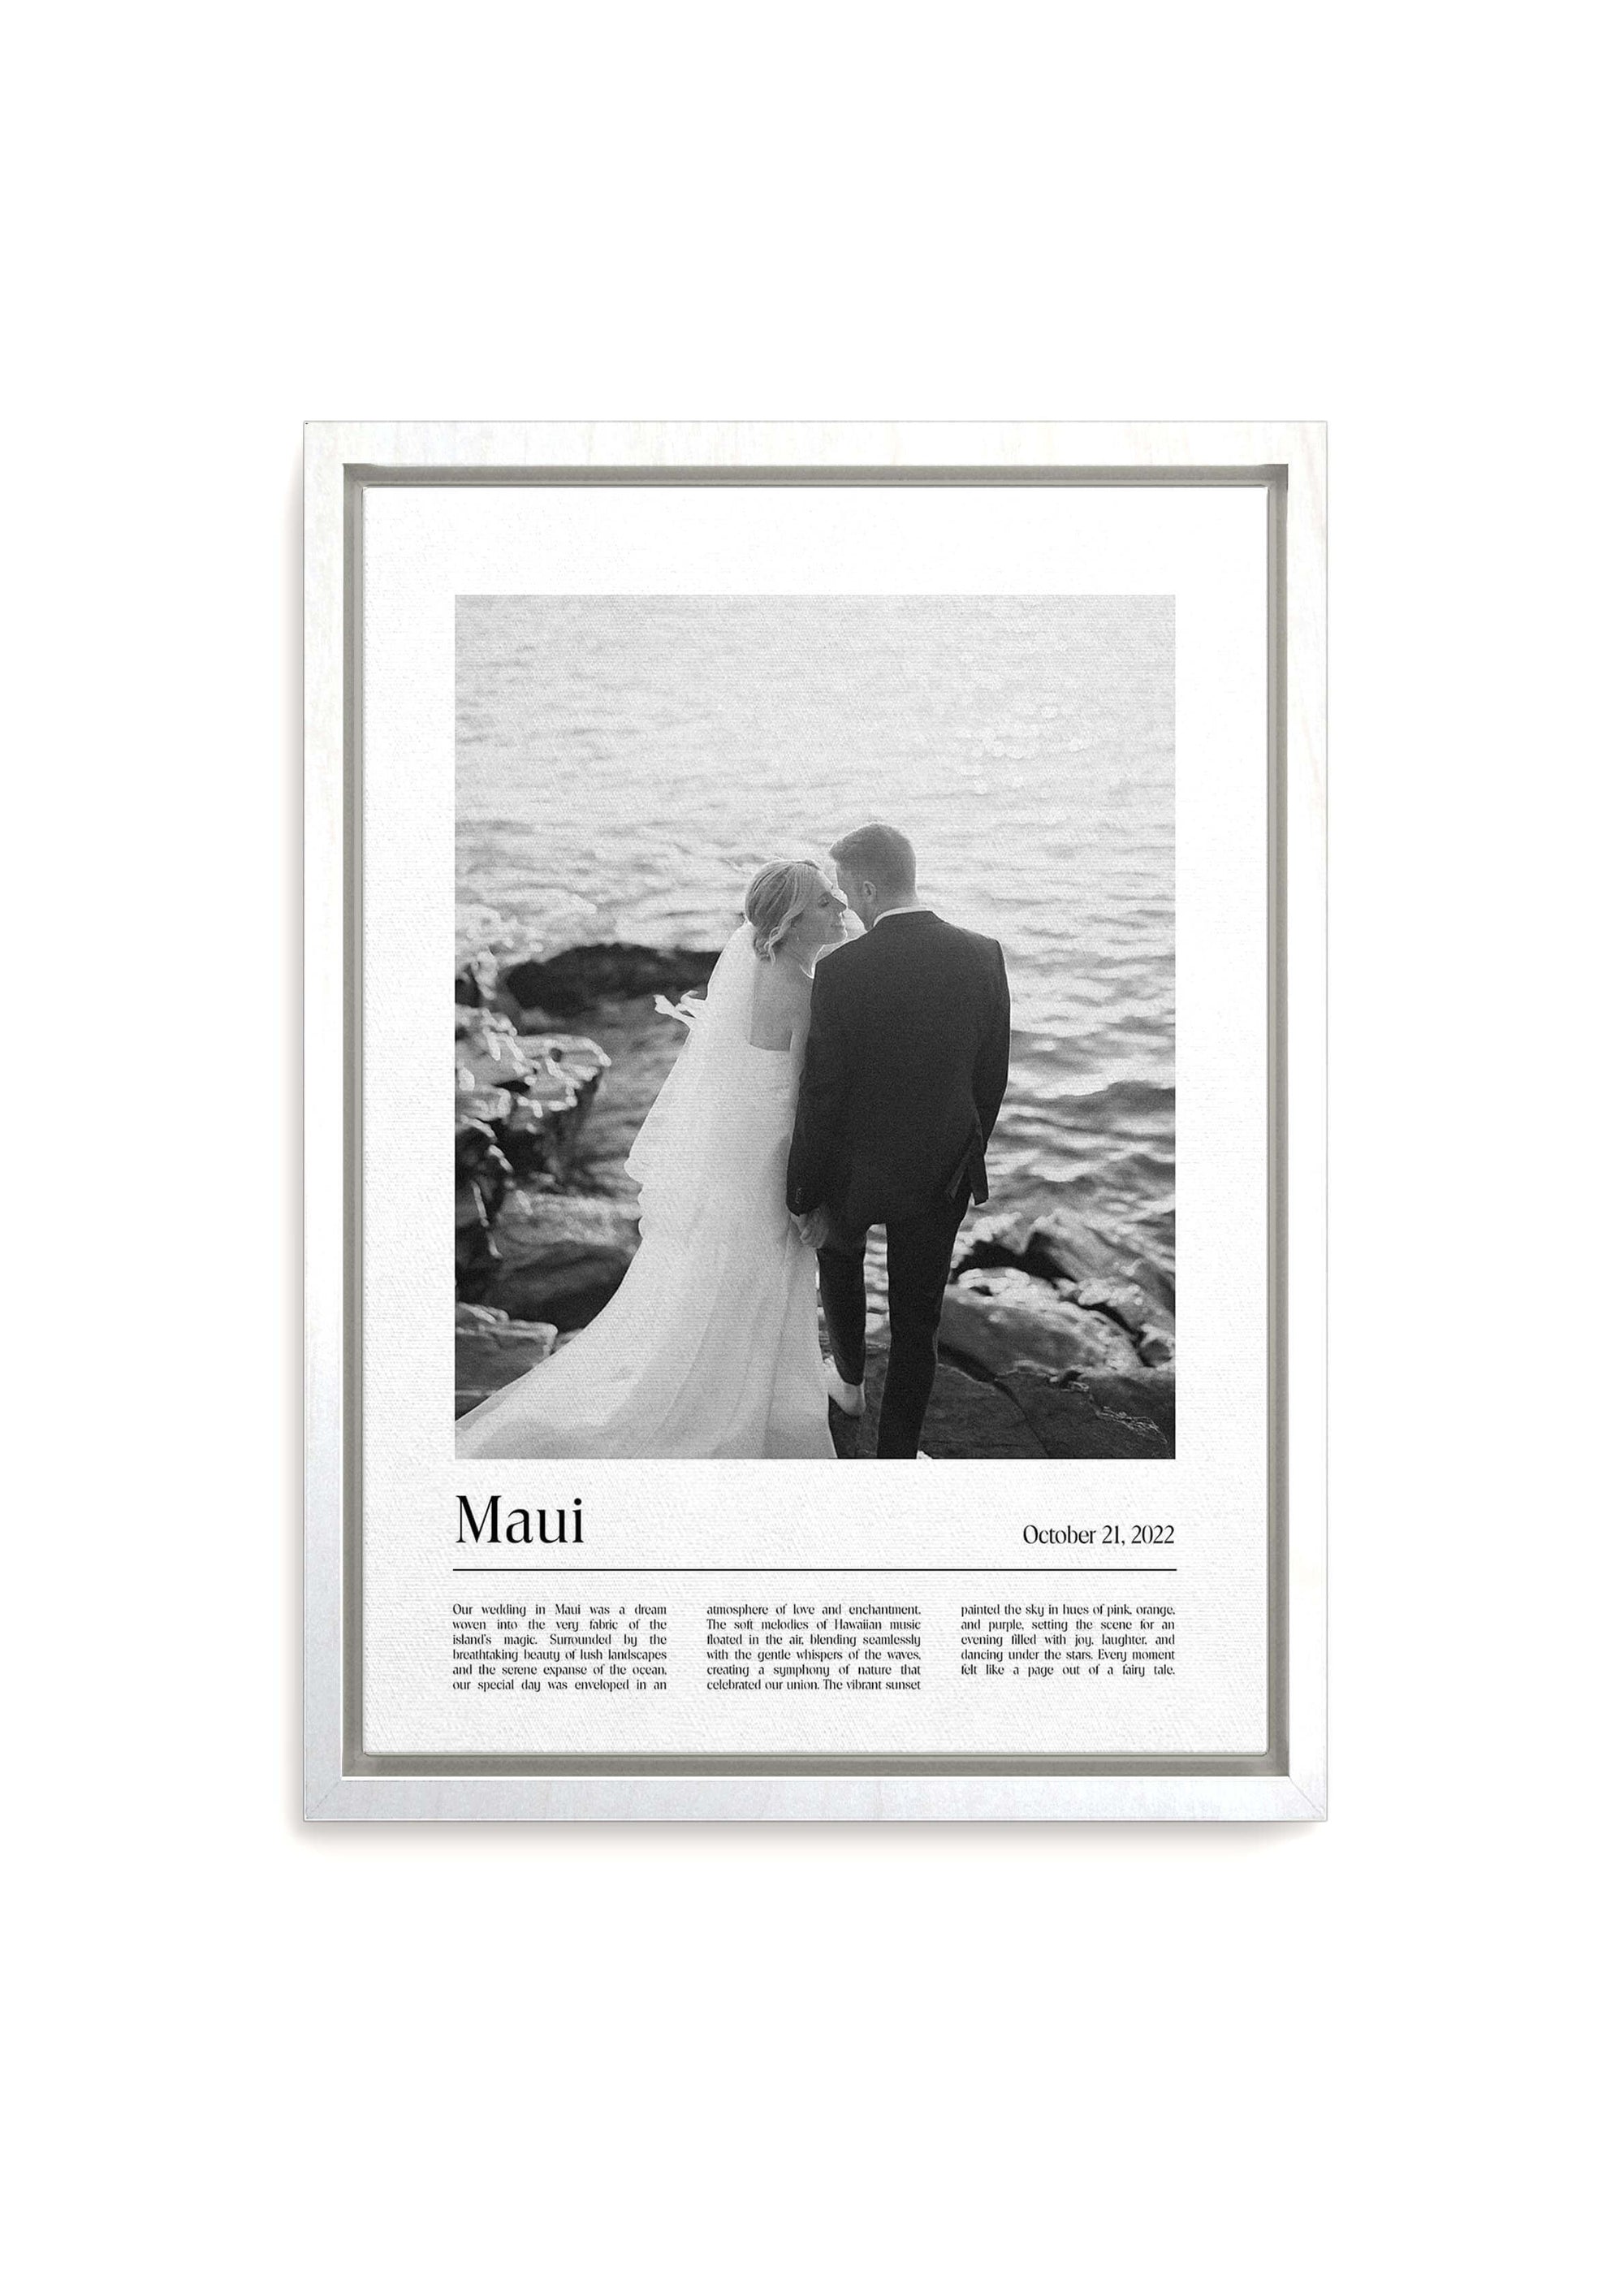 Anniversary gift canvas of a black and white photo of a wedding couple by the sea with a custom message added. The white framed canvas is on a white background.